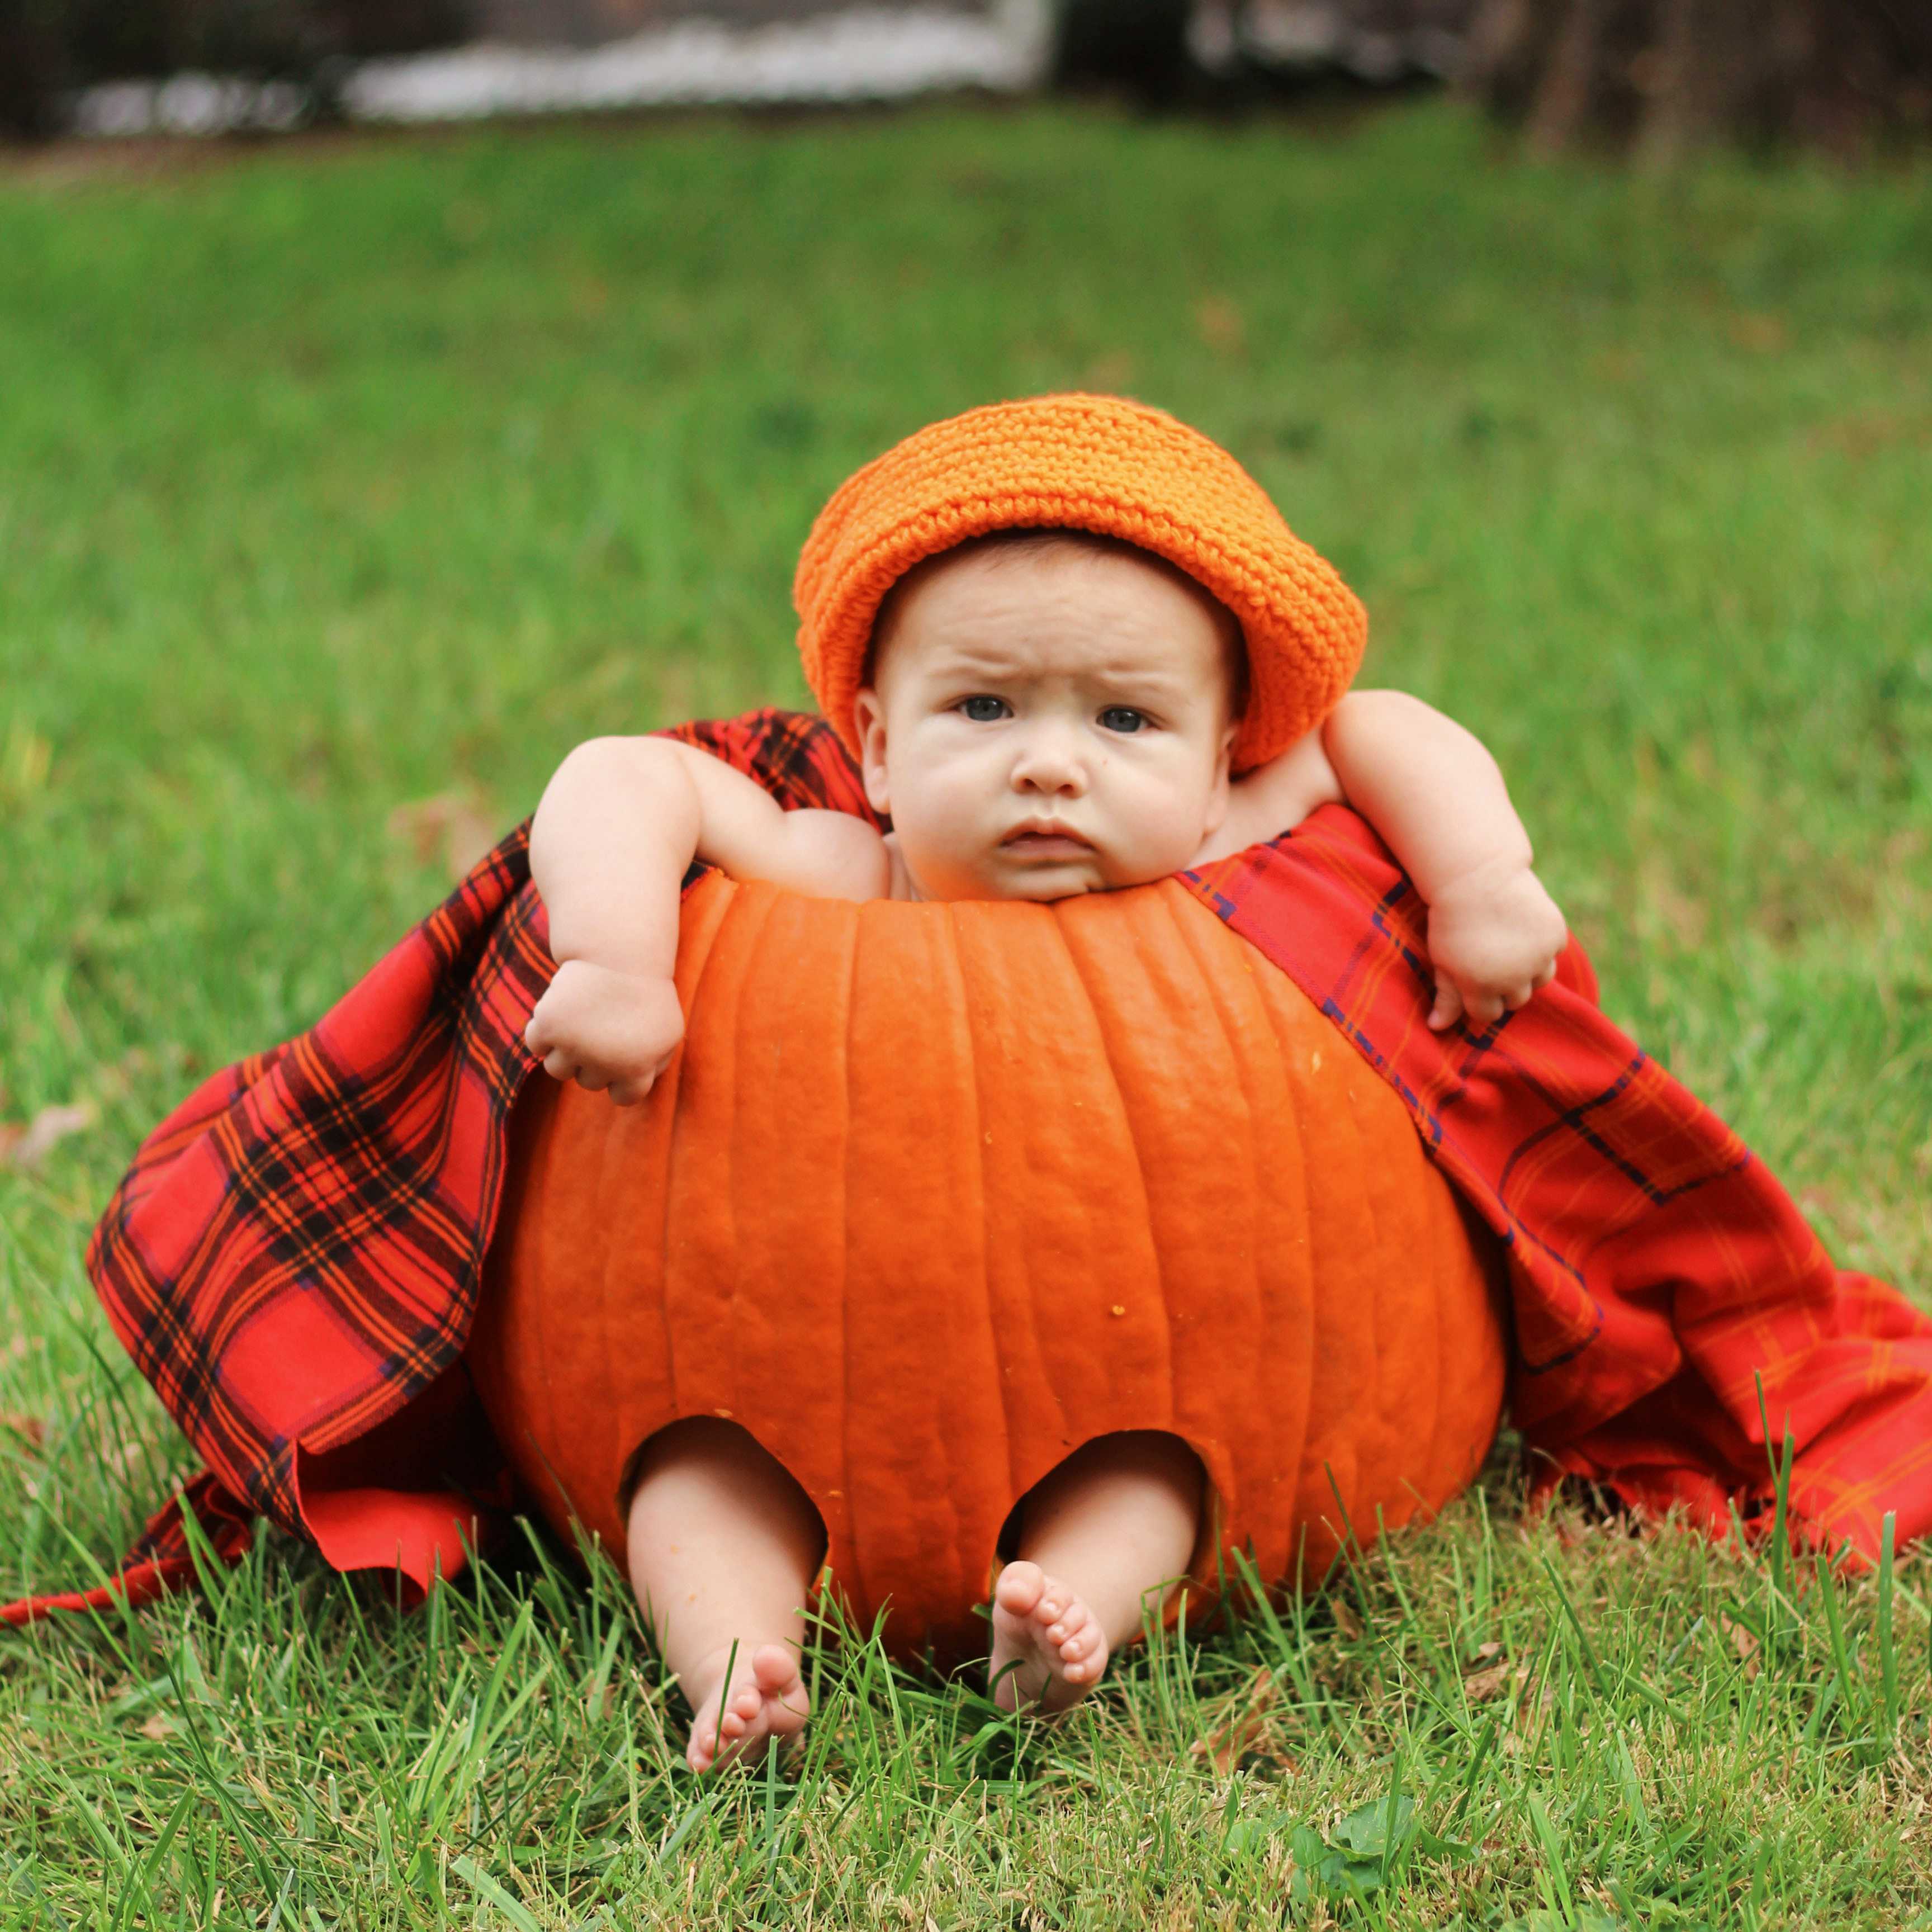 10 Tips For Baby's First Halloween